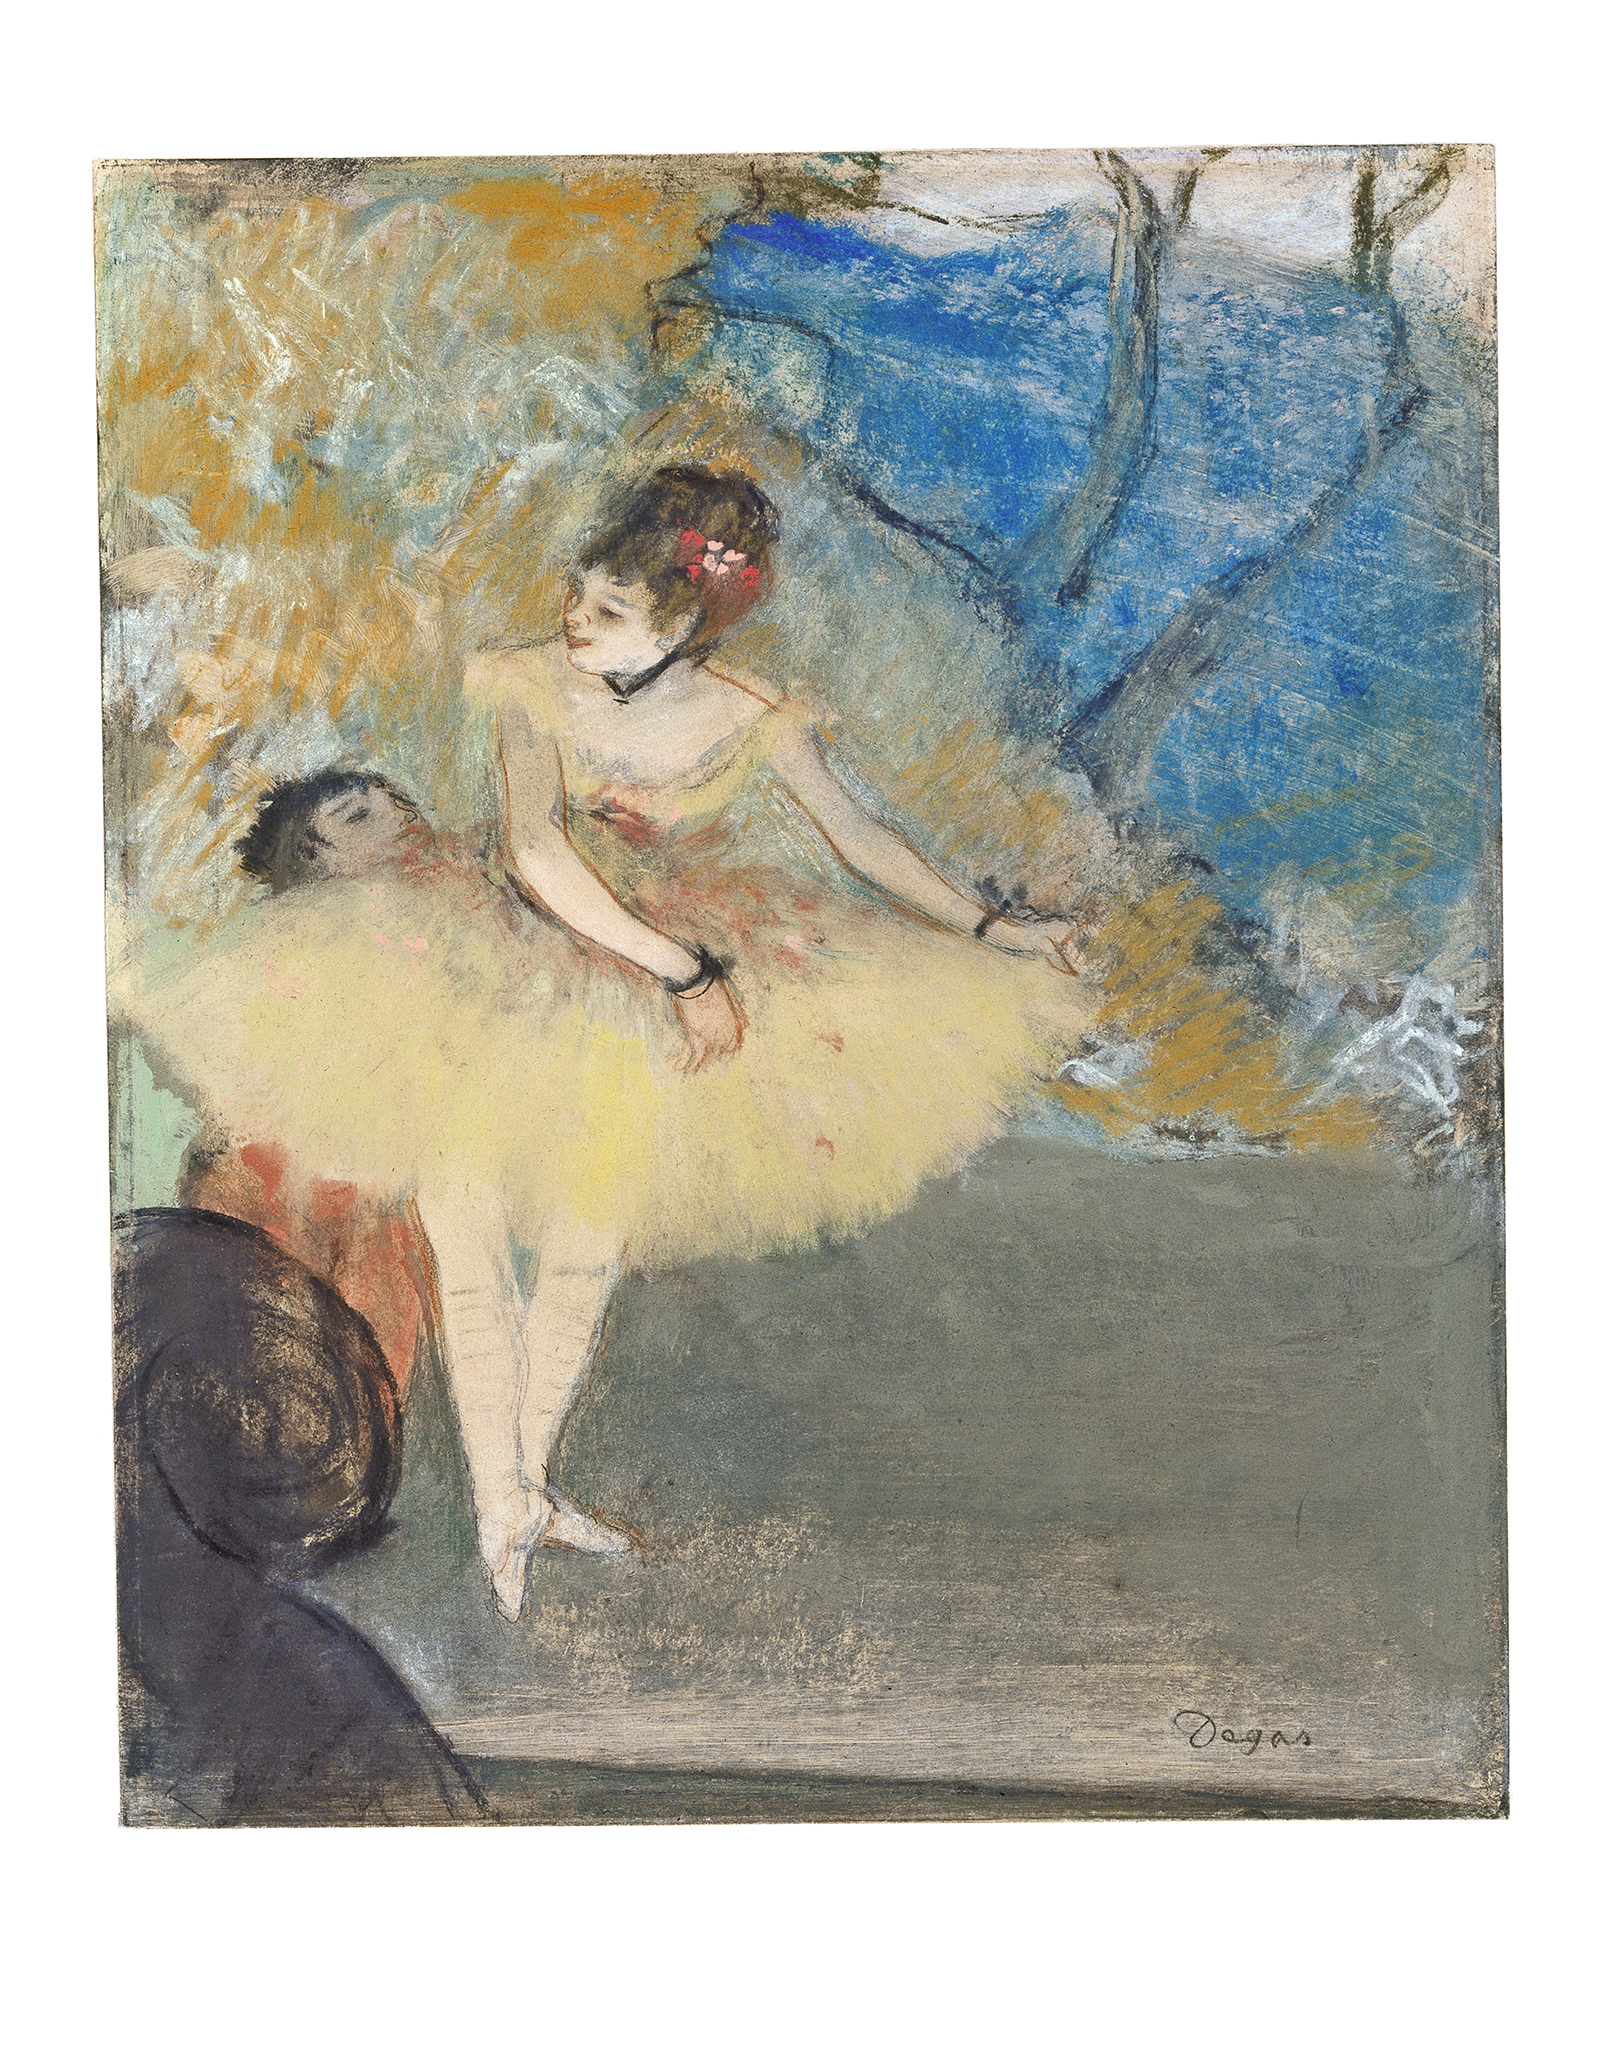 A pastel and watercolor painting of a woman in a yellow tutu preforming a ballet dance. She has her arms stretched out to her left and one of her feet is standing up straight. She has brown hair with a red flower or tie attached to it. Behind the left side of her tutu, we can see the face of another young child wearing orange. The background is made up with an assortment of colors like blue, orange, and green.